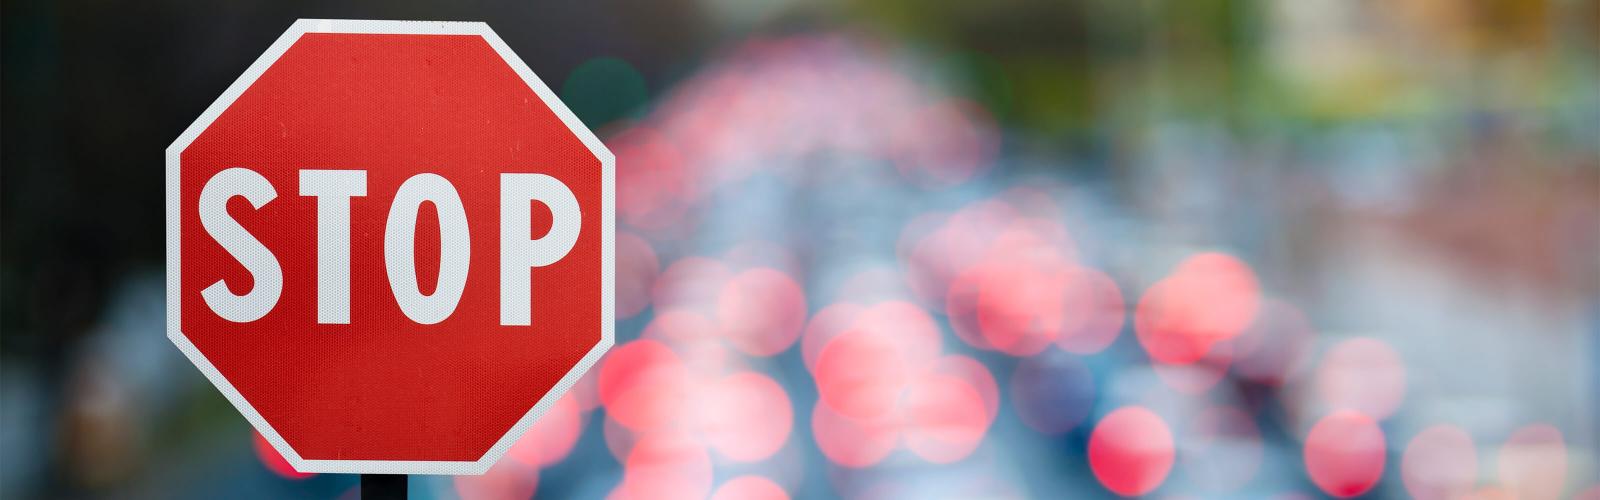 Stop sign banner